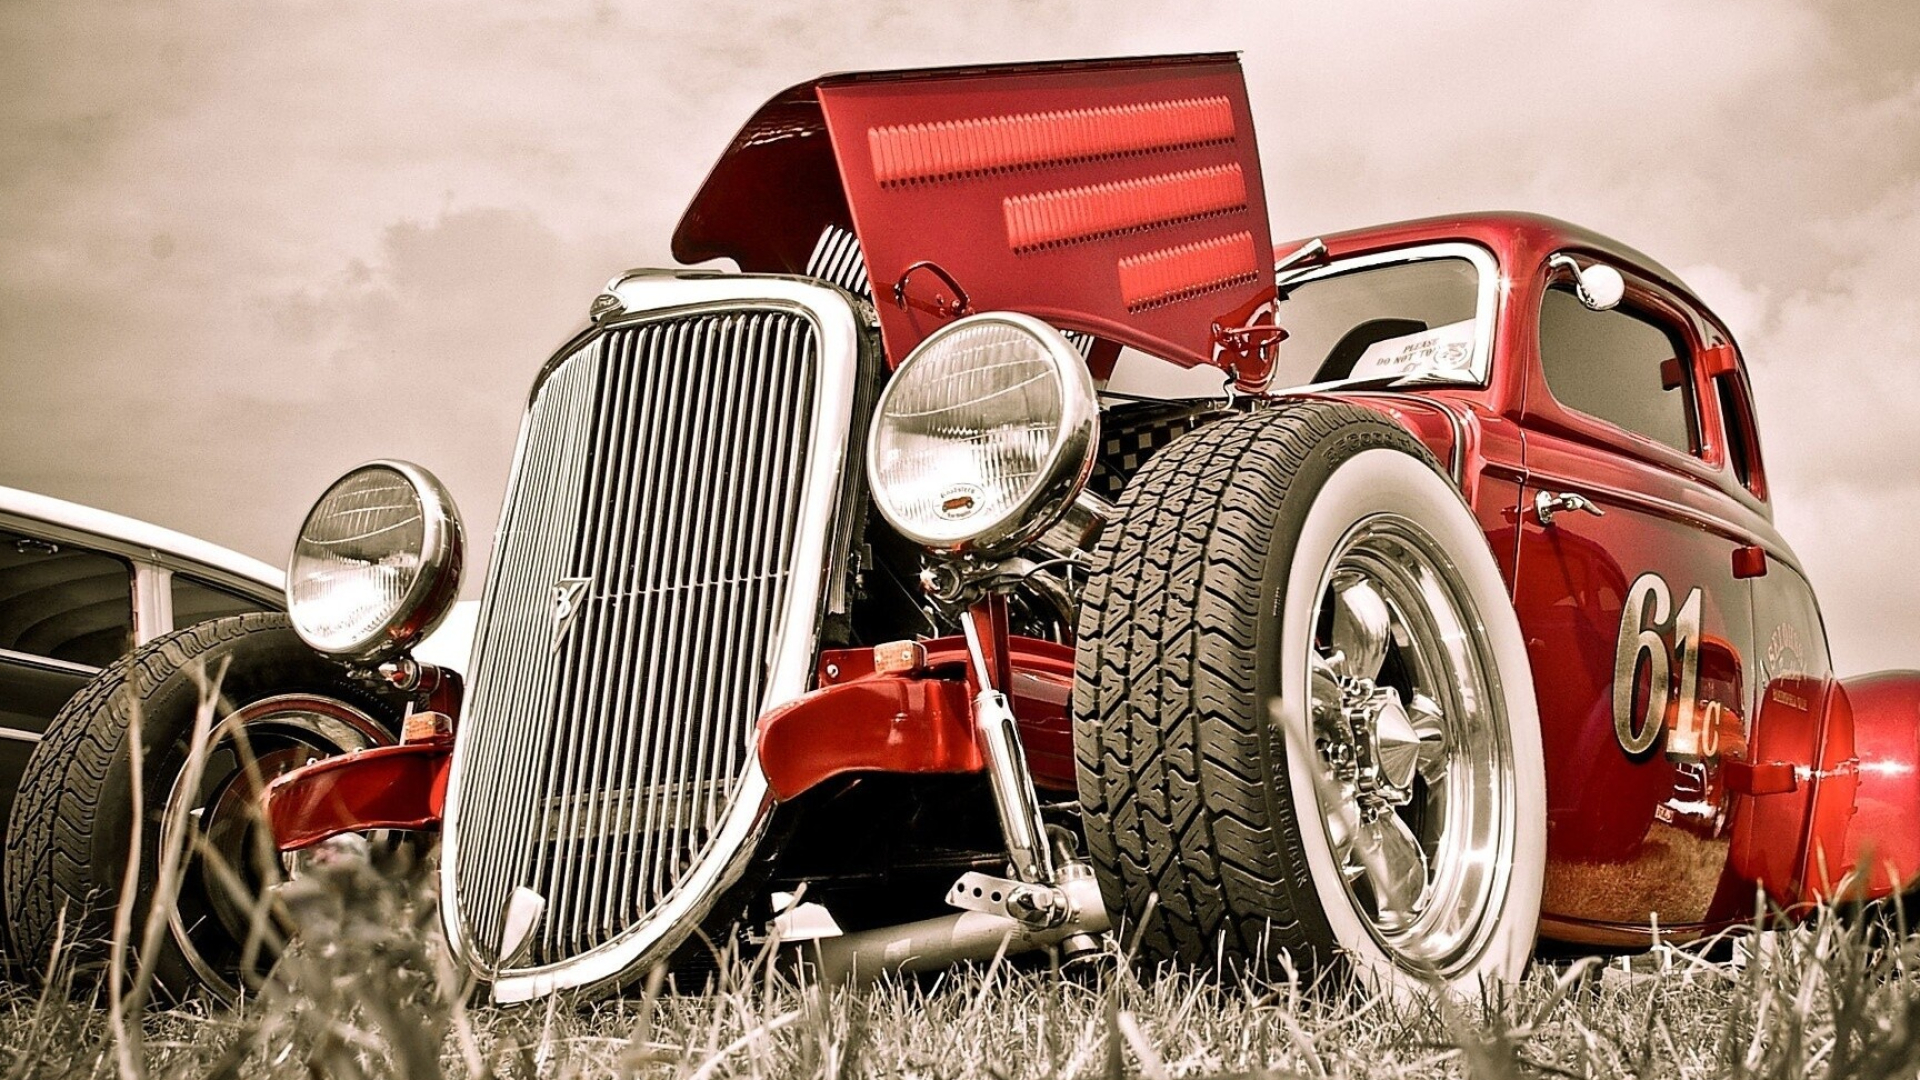 Hot Rod: 1933 Ford, Coupe, Altered for fast acceleration. 1920x1080 Full HD Wallpaper.